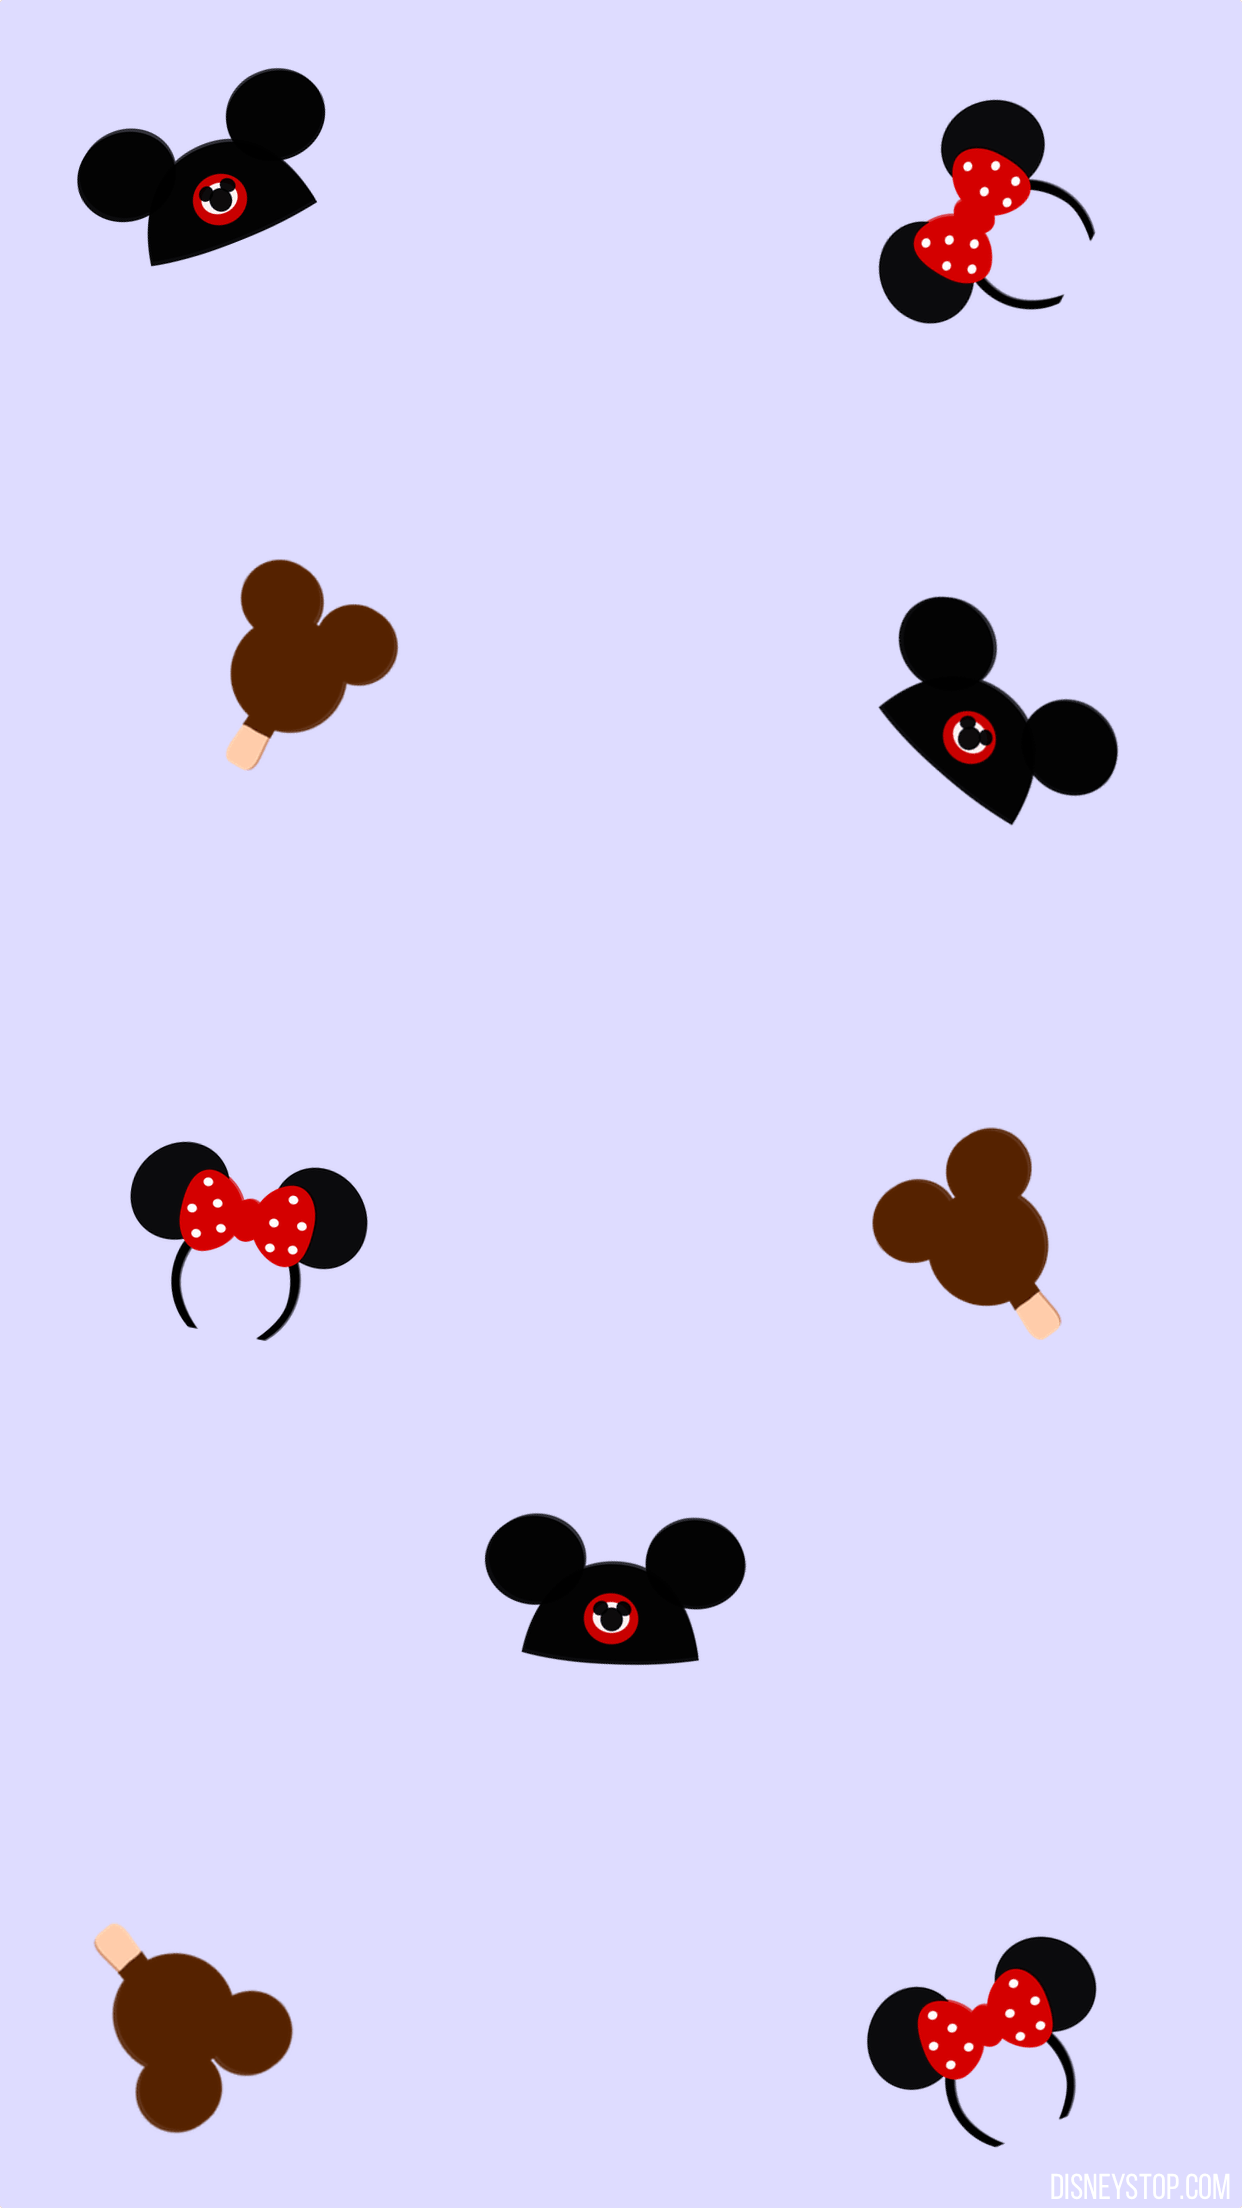 Mickey Mouse ears are shown in various colors. - Mickey Mouse